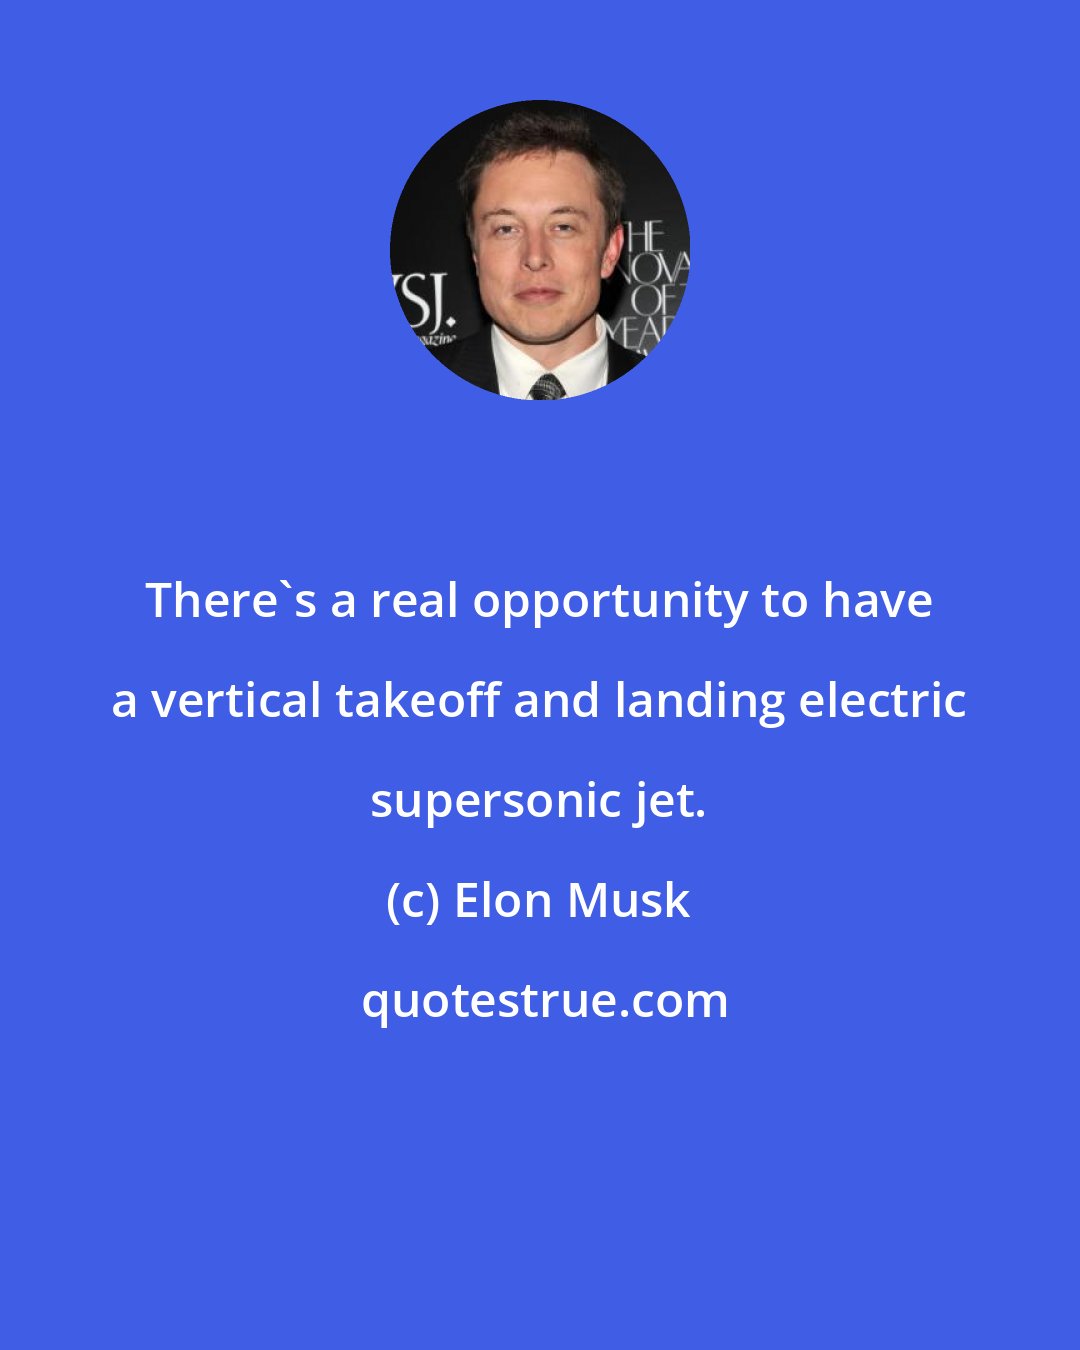 Elon Musk: There's a real opportunity to have a vertical takeoff and landing electric supersonic jet.